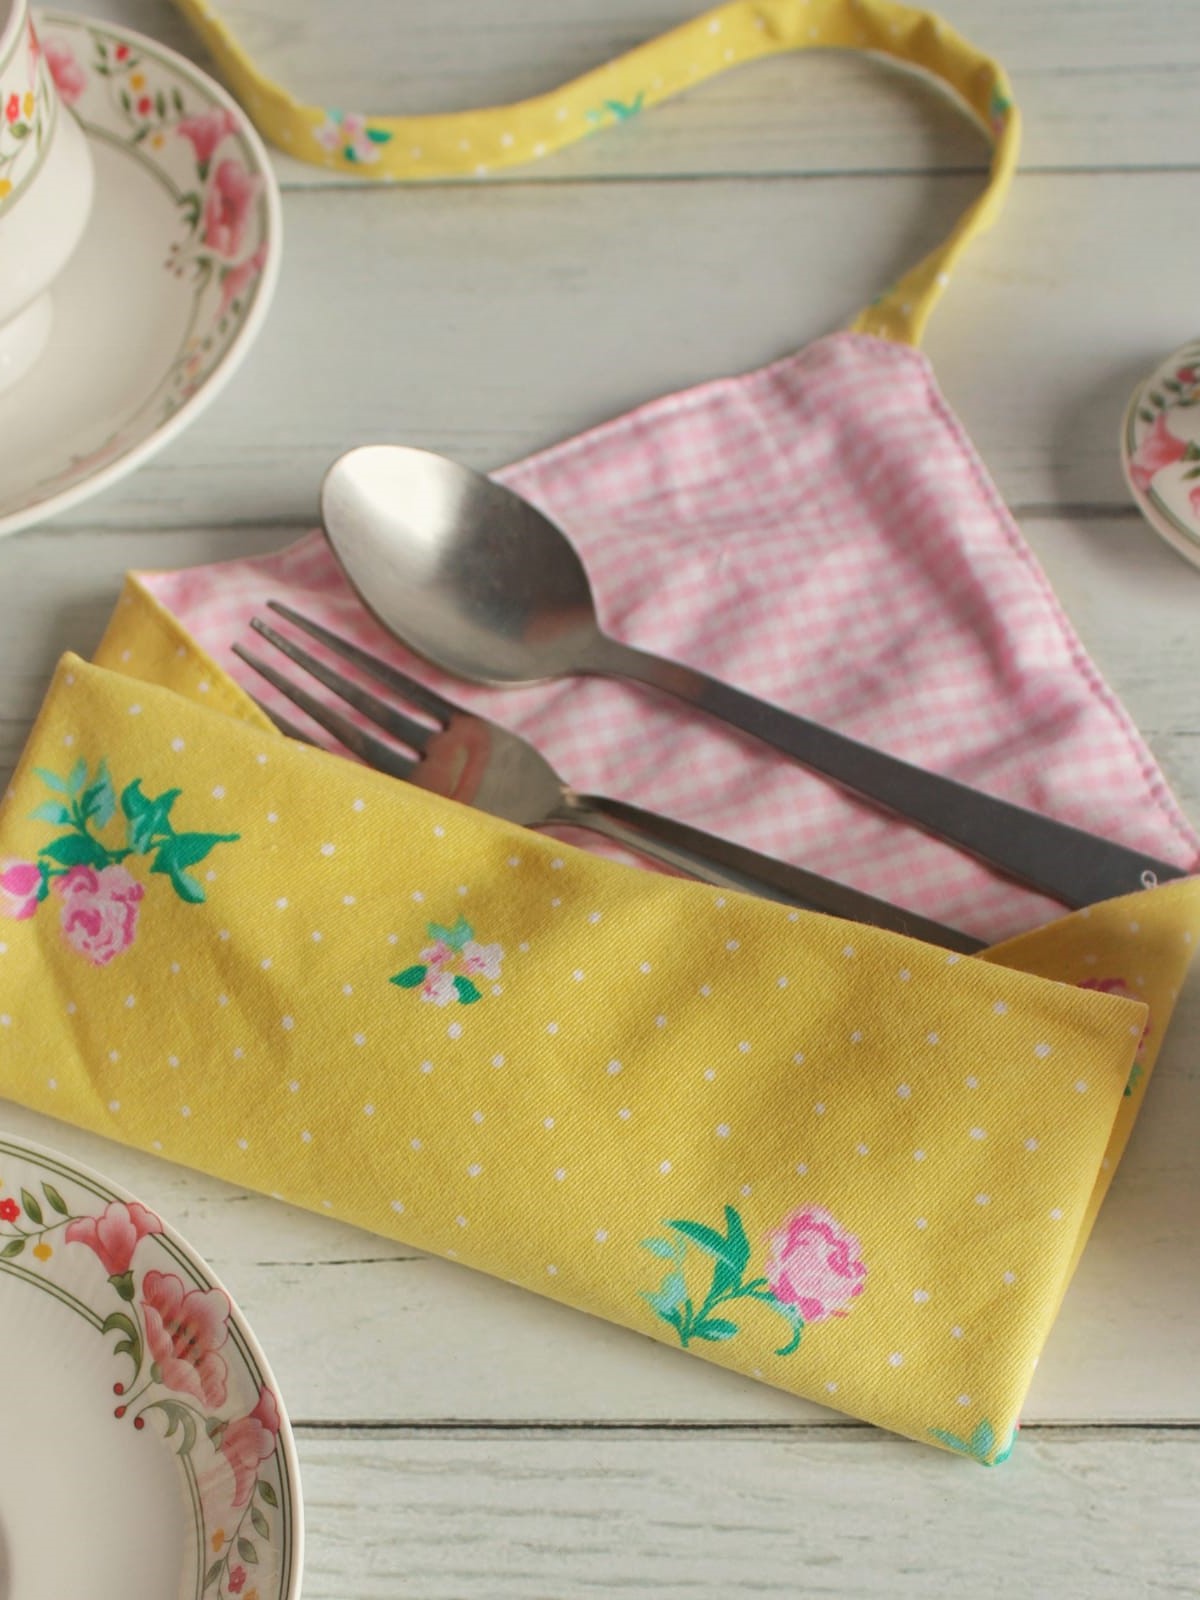 Cutlery Wrap / Cutlery Carry Pouch - Reversible - Yellow floral with pink gingham themed